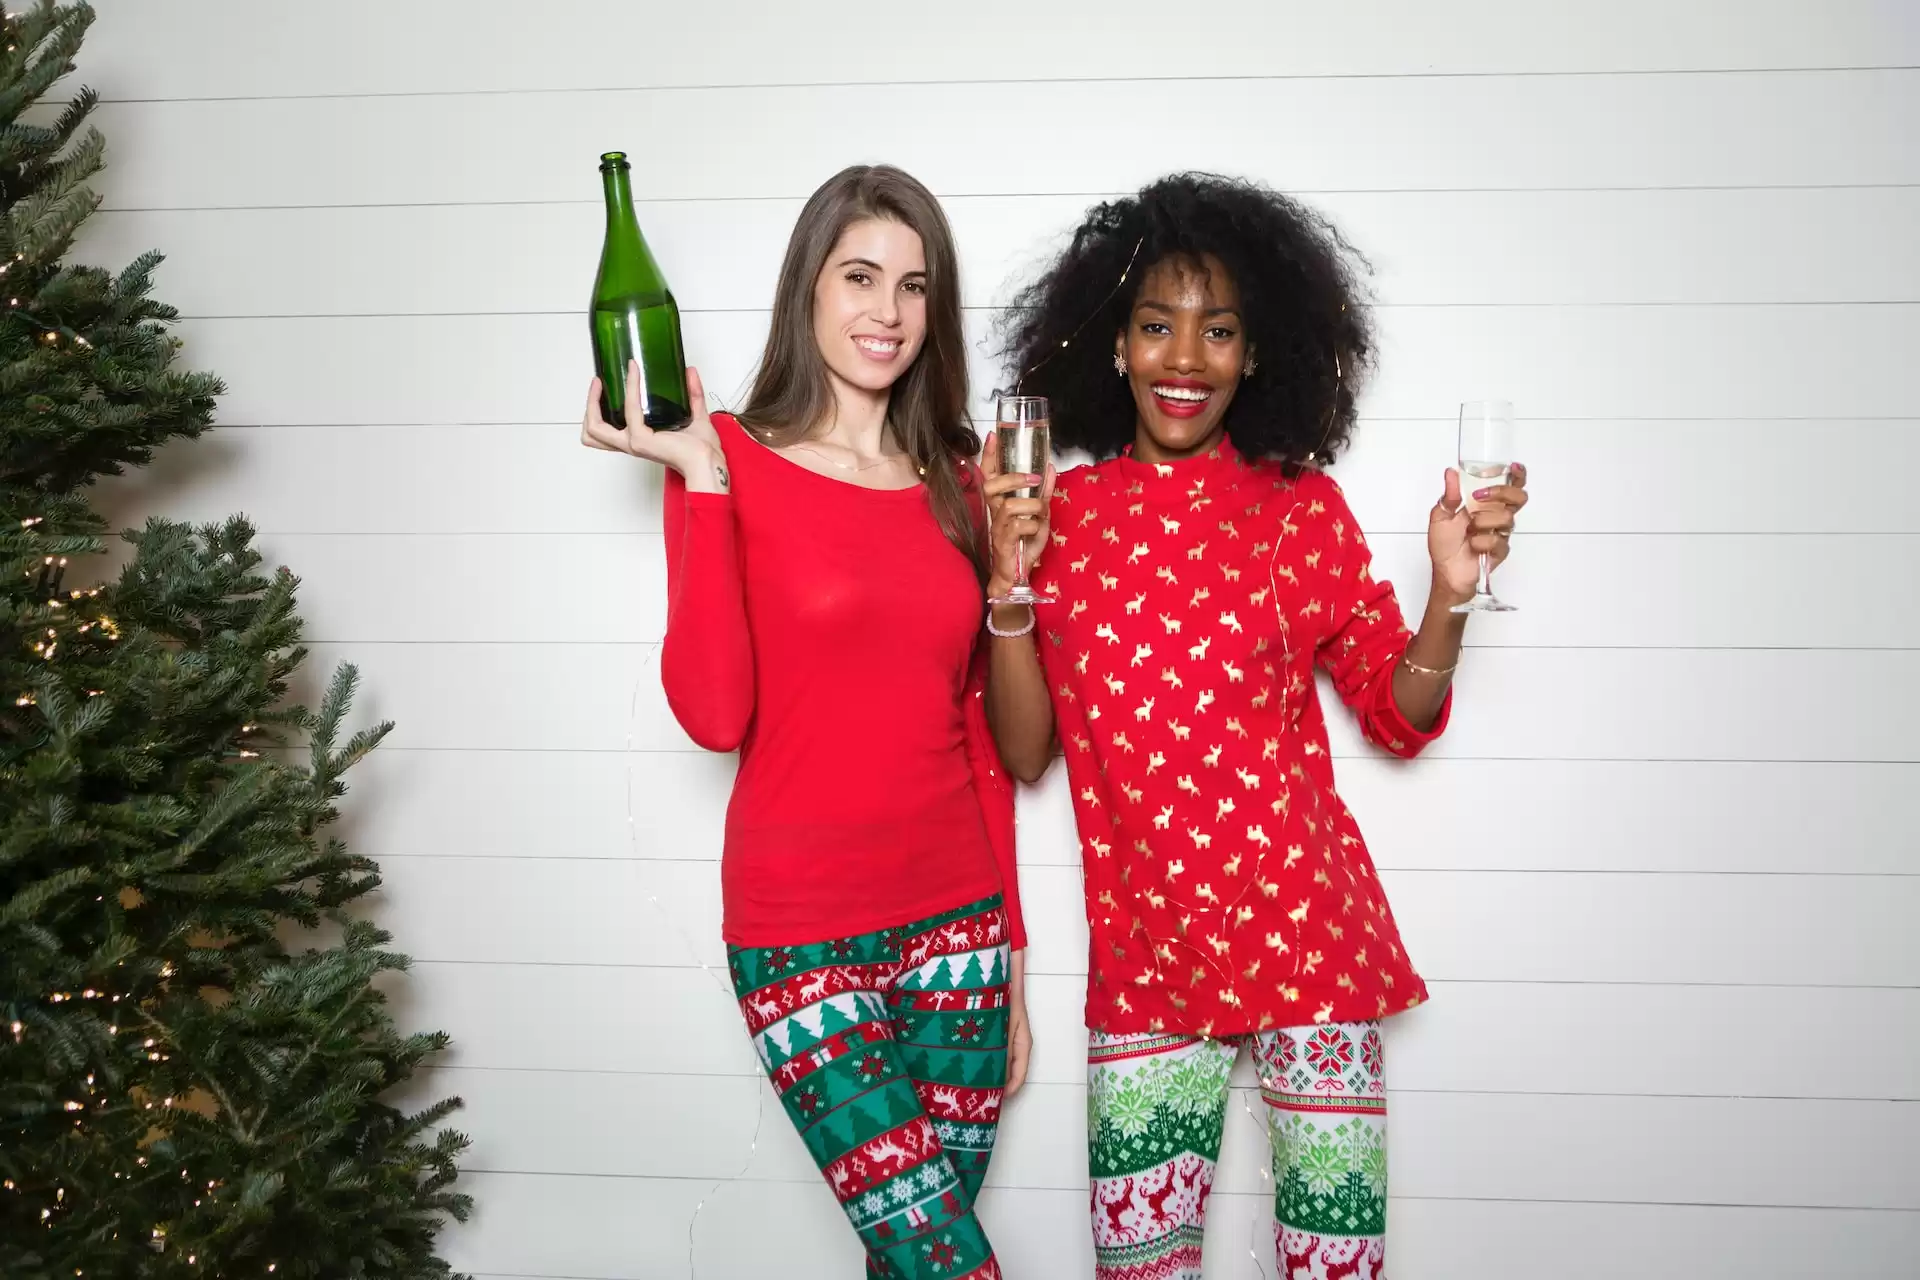 Two women enjoying a holiday party